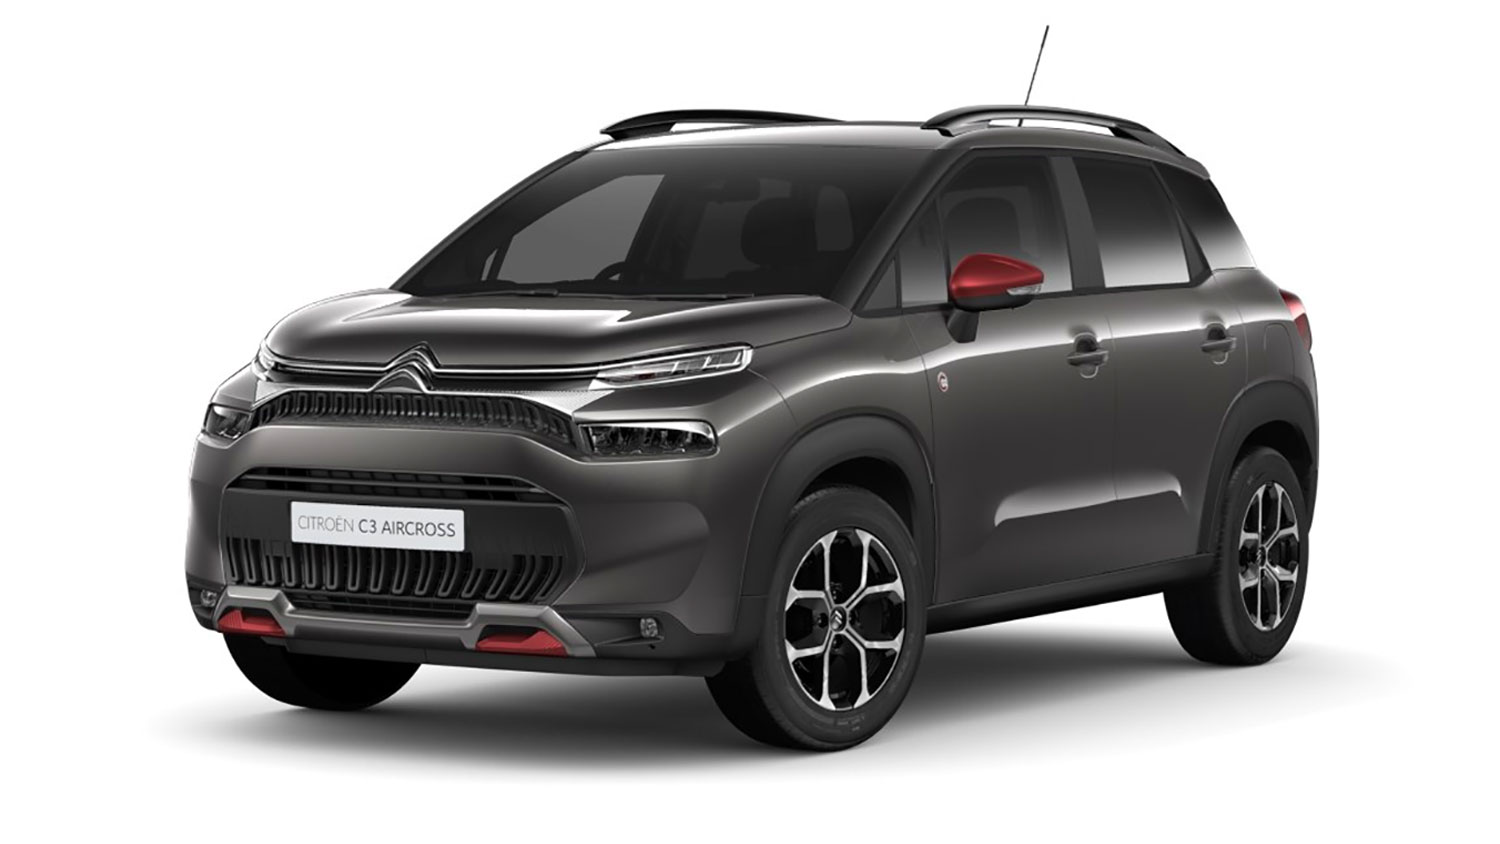 Citroen C3 Aircross Automatic Variant Now Available for Reservation at Select Dealerships